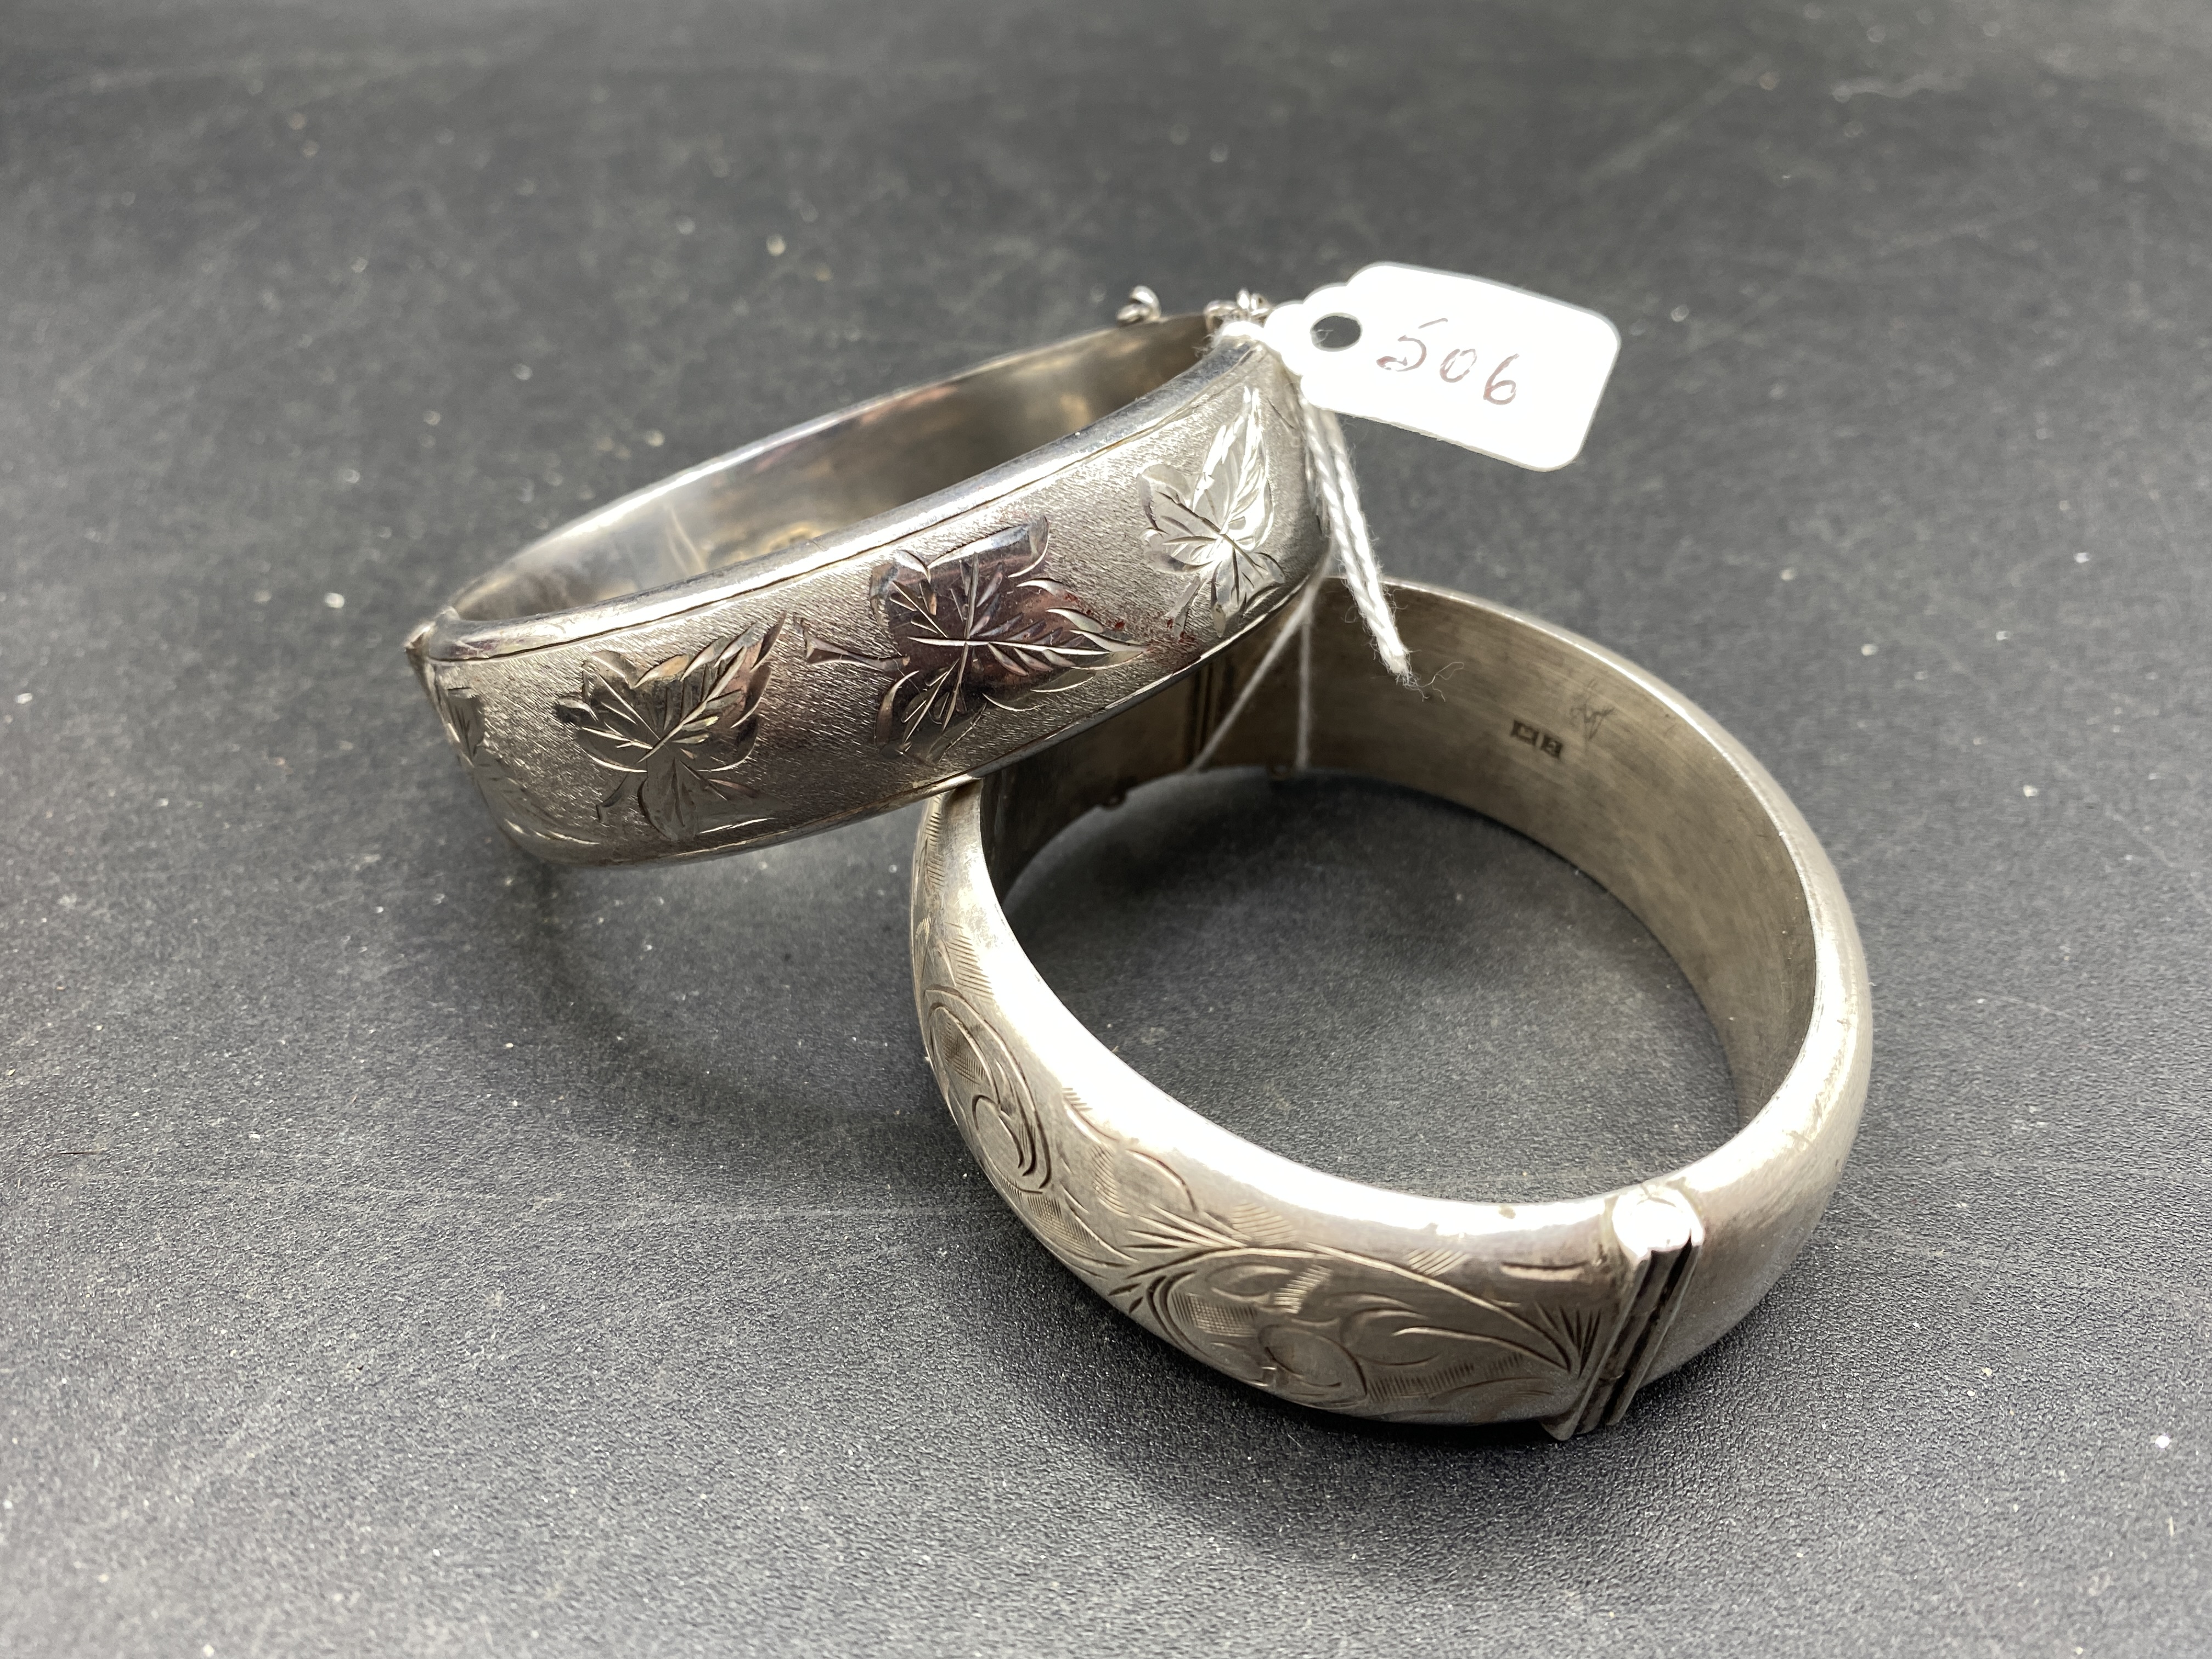 Two large heavy gauge silver bangles 72 gms